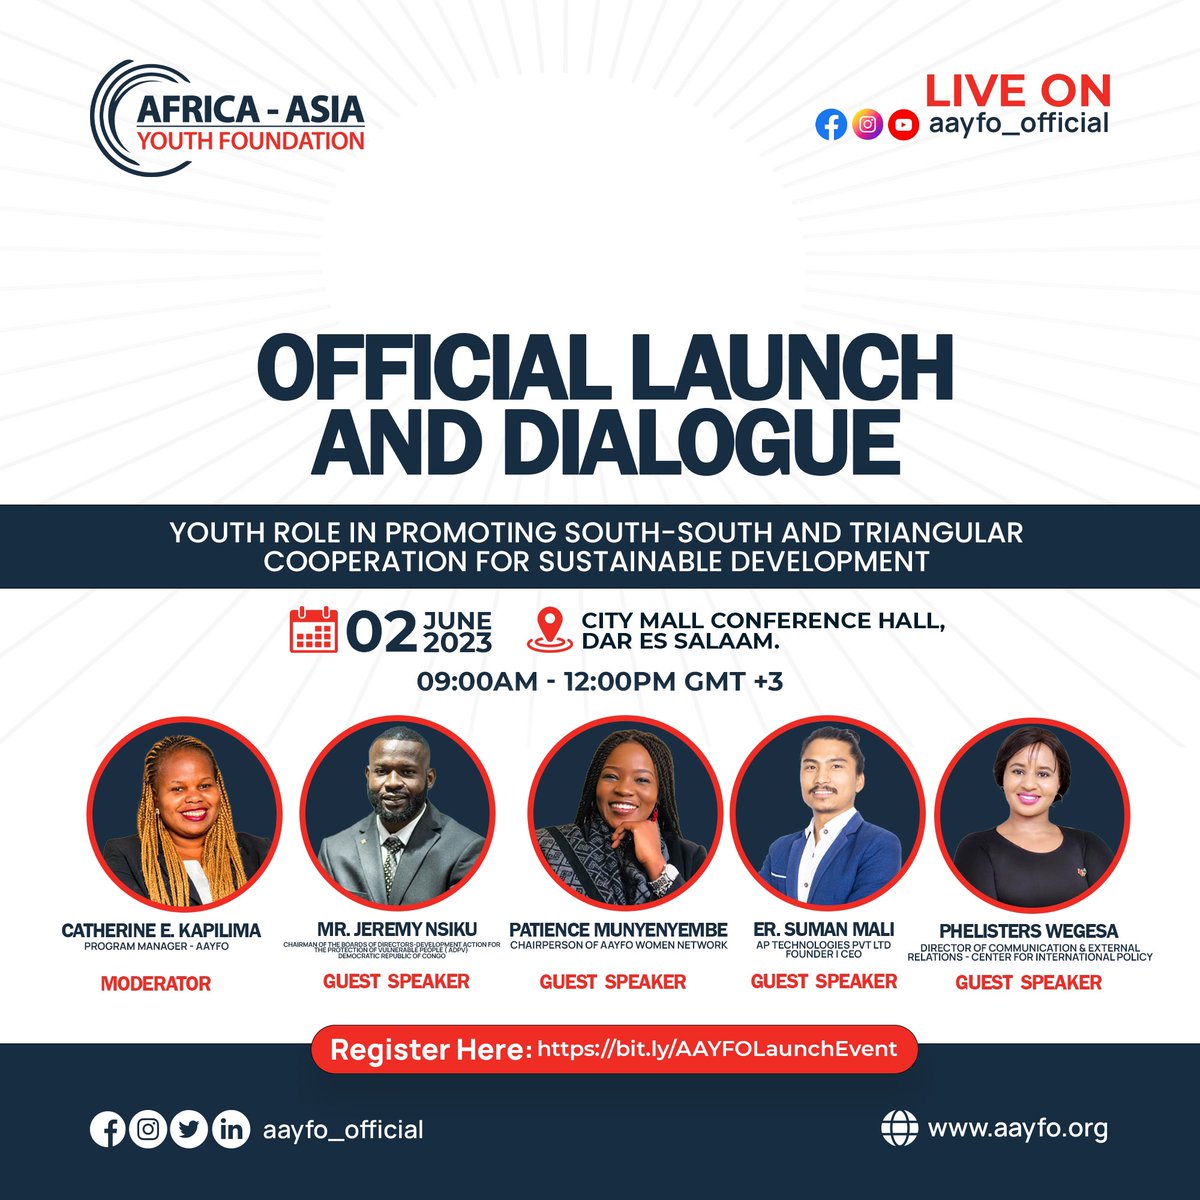 One Day left to the #AAYFOLAUNCH event and Dialogue. 

Meet our speakers Mr. Jeremy Nsiku, @Munyenyembe101 , Mr. Suman Mali and @PWegesa  

Register to attend the event through: : bit.ly/AAYFOLaunchEve…

#AAYFO #SDGs2030 #Tanzania